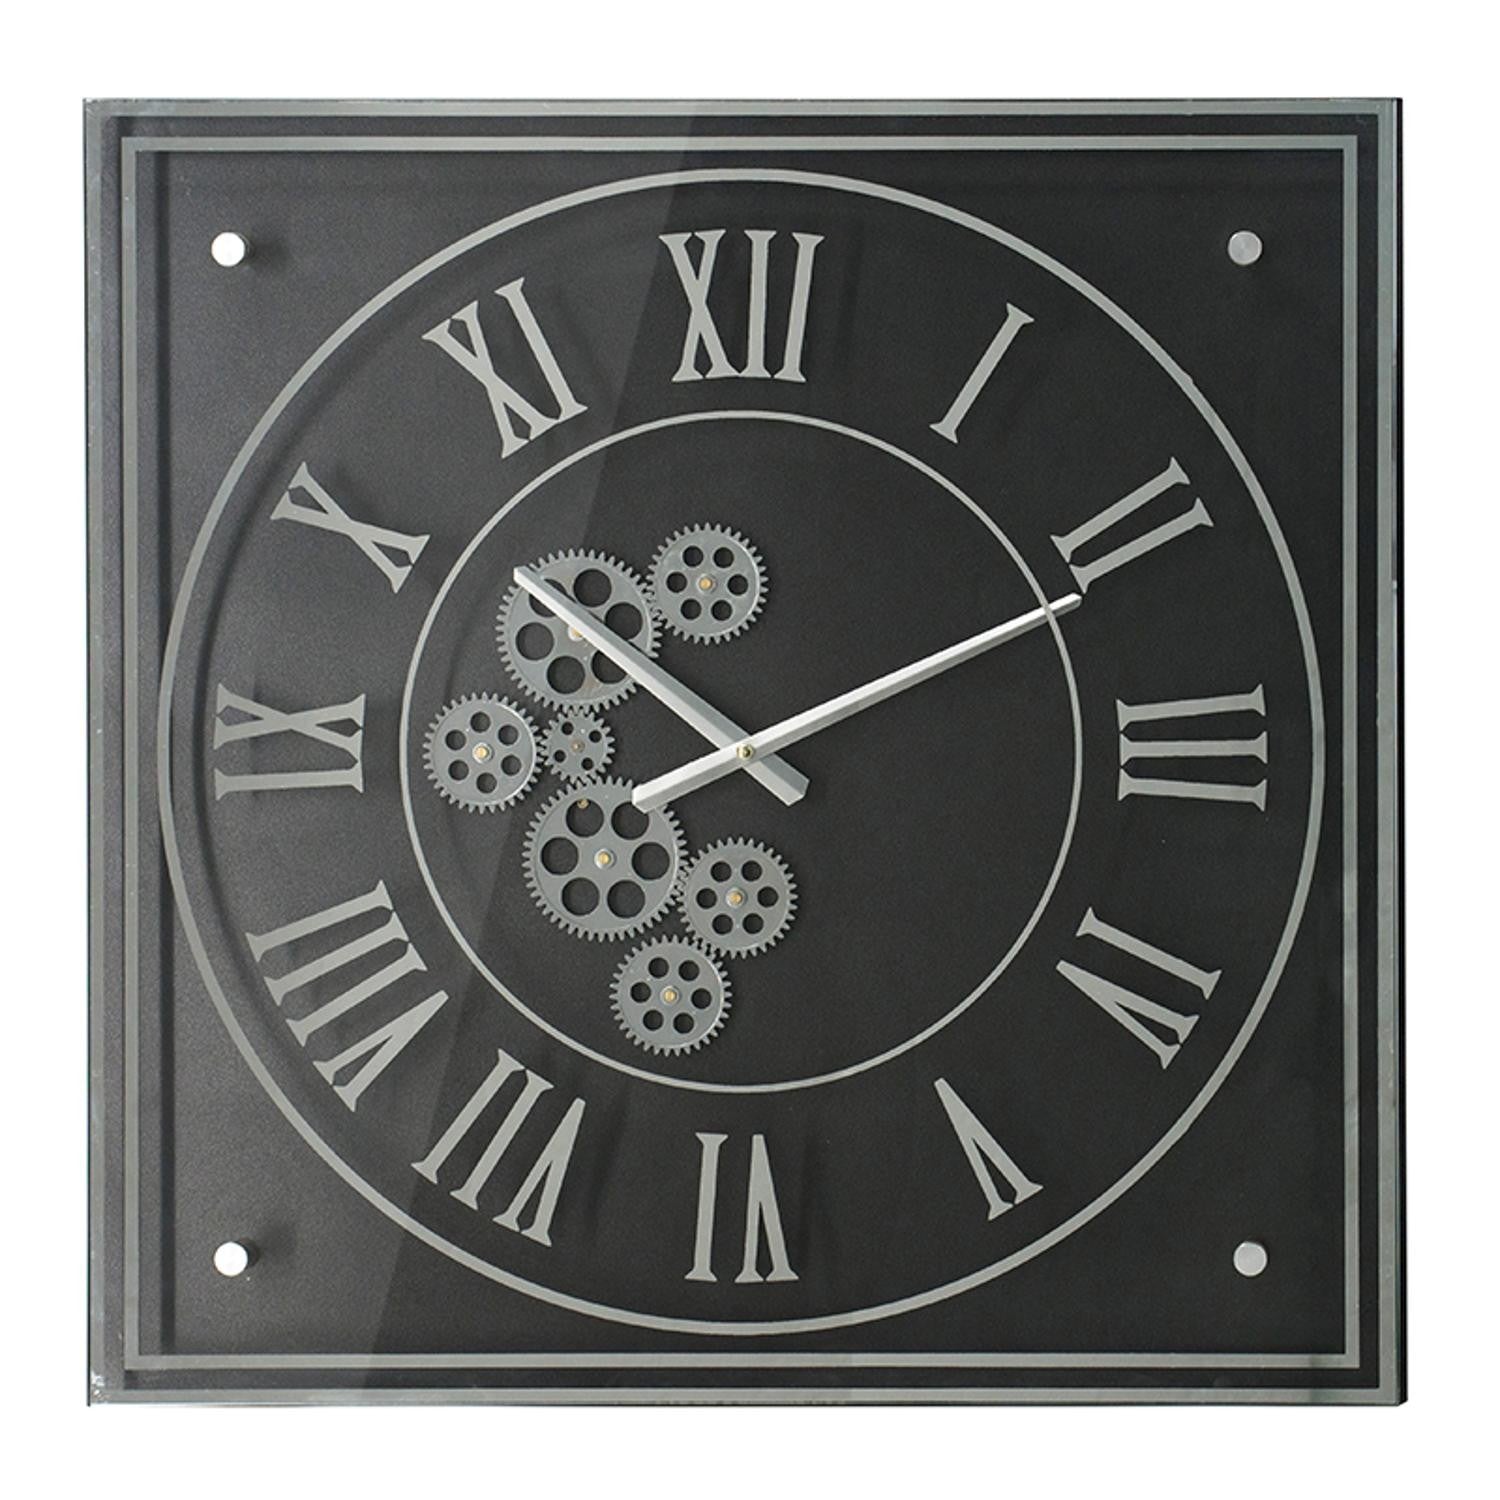 24" Black and Silver Vintage Style Gears Square Wall Clock